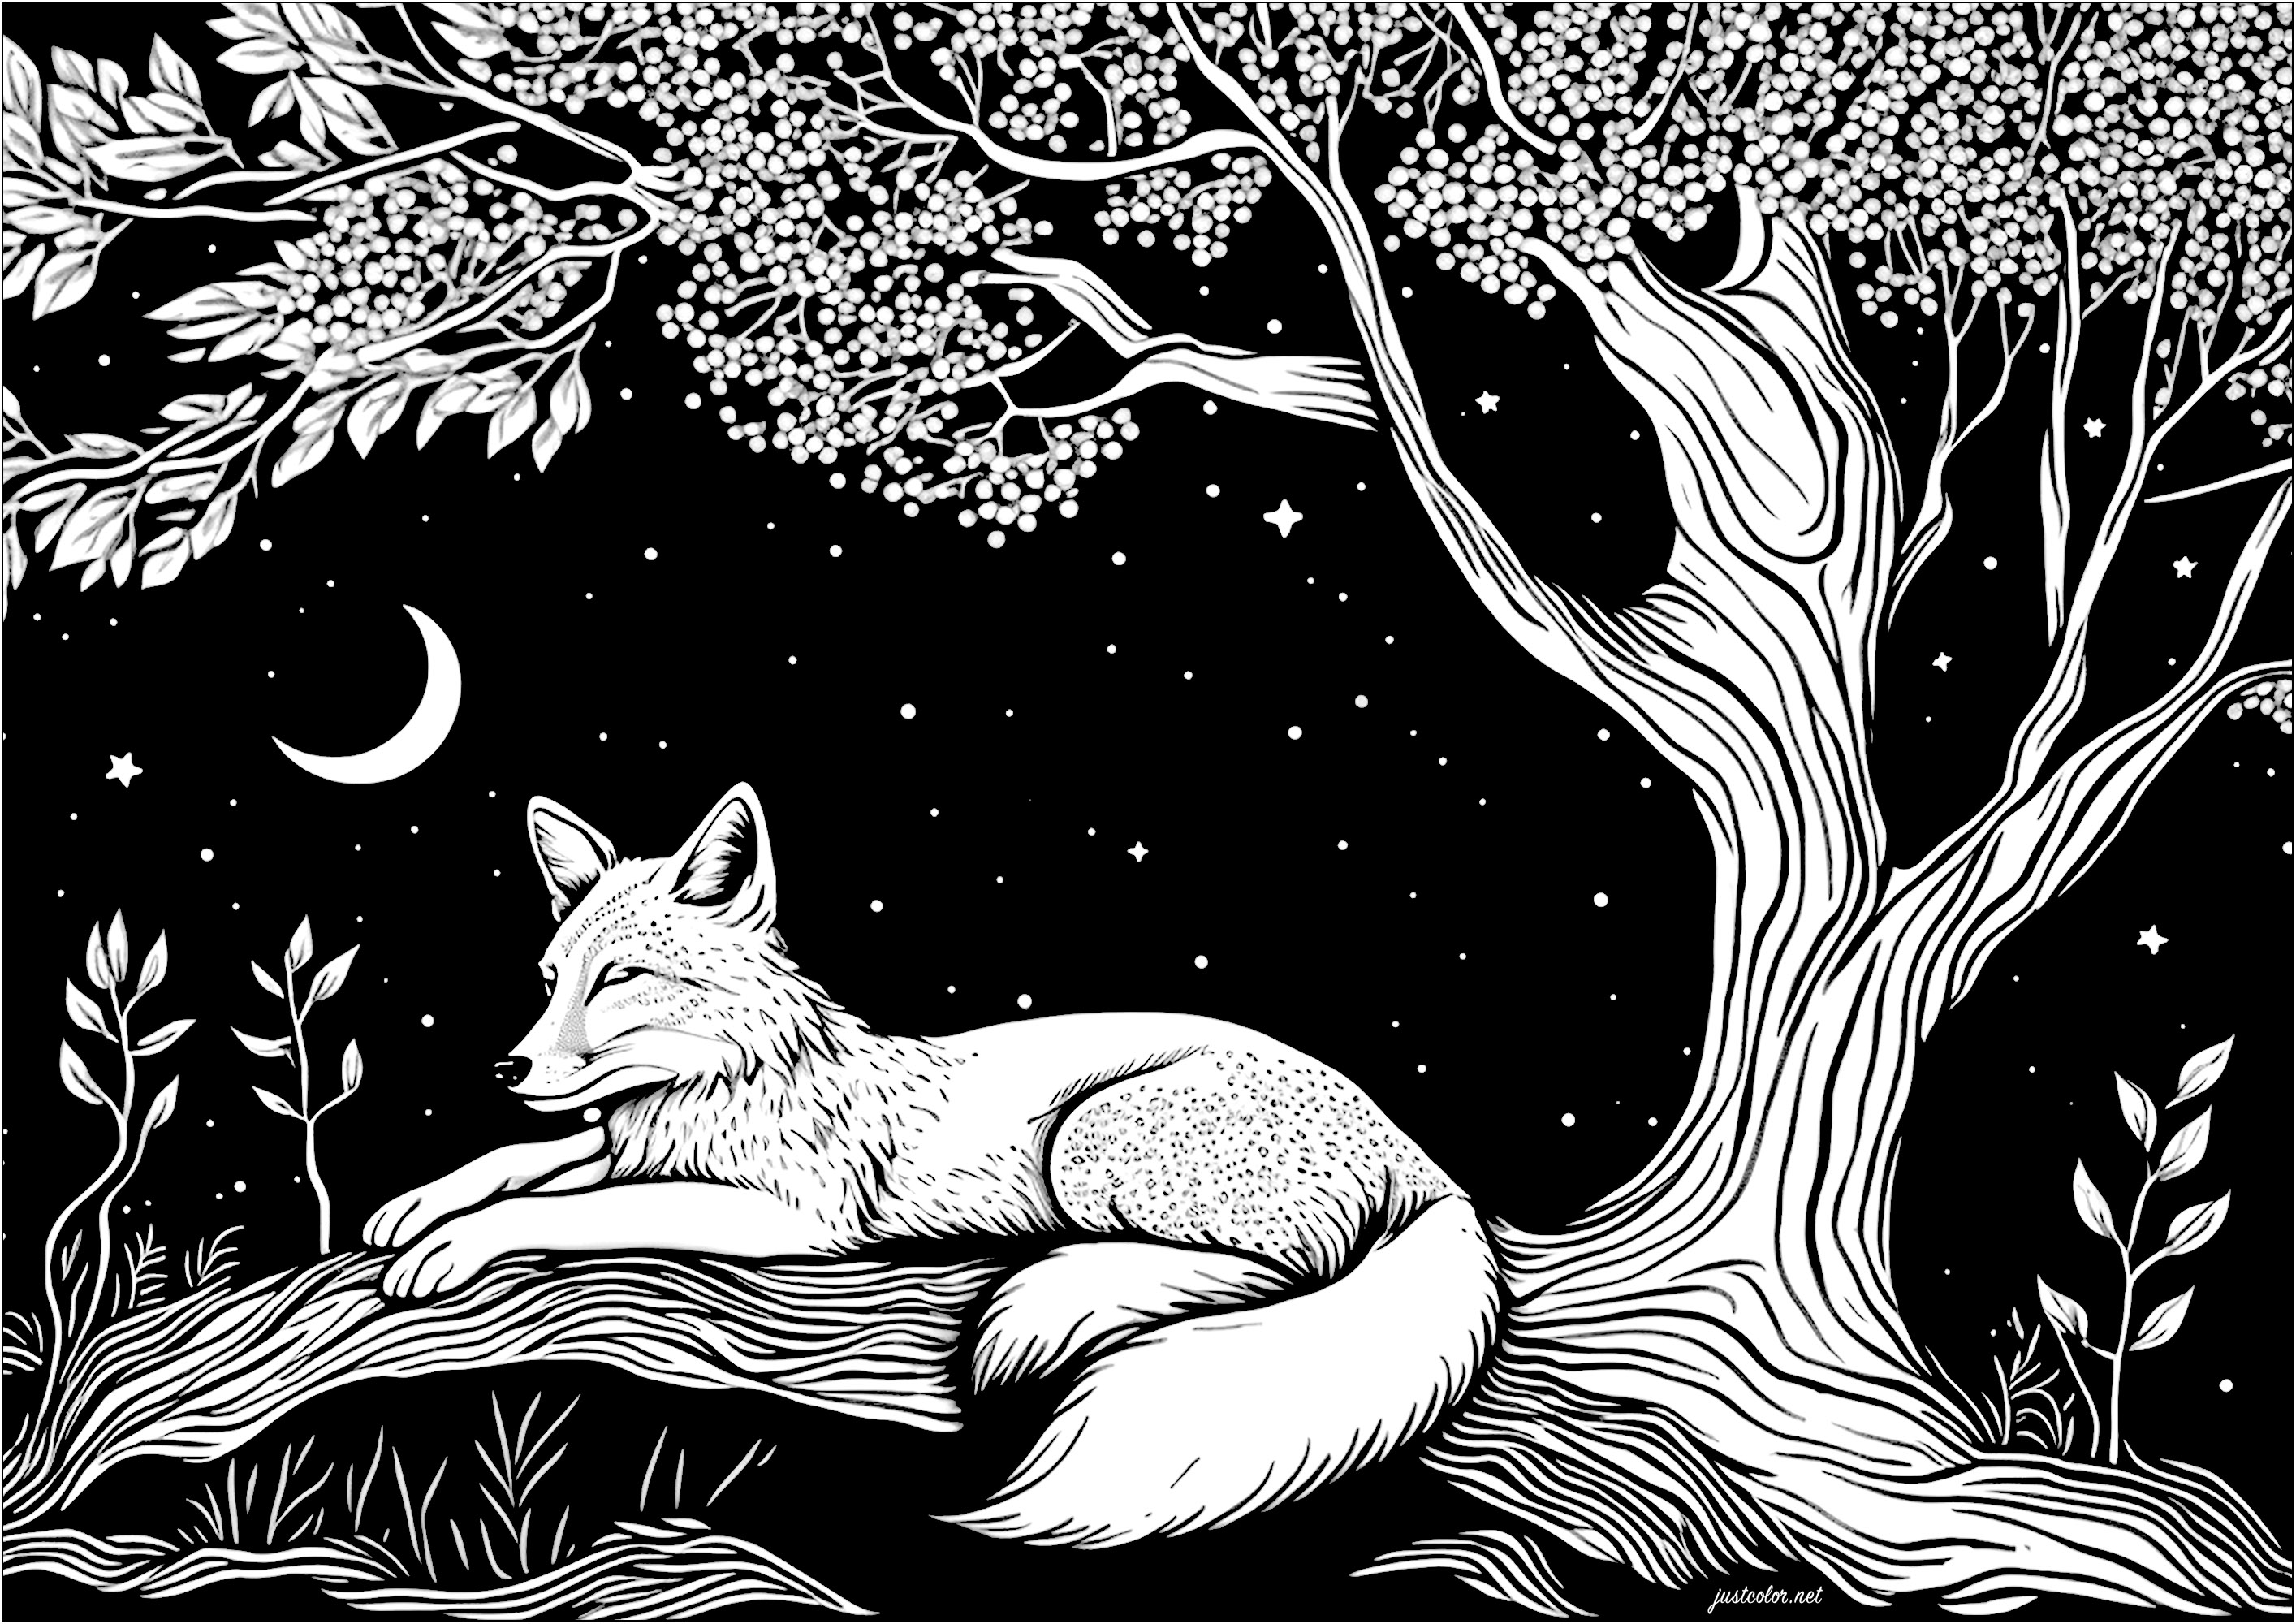 Coloring a fox asleep in the moonlight. It's a clear, calm night, and a peaceful fox is asleep under a tree and the stars. He is surrounded by a starry sky and a quarter moon.